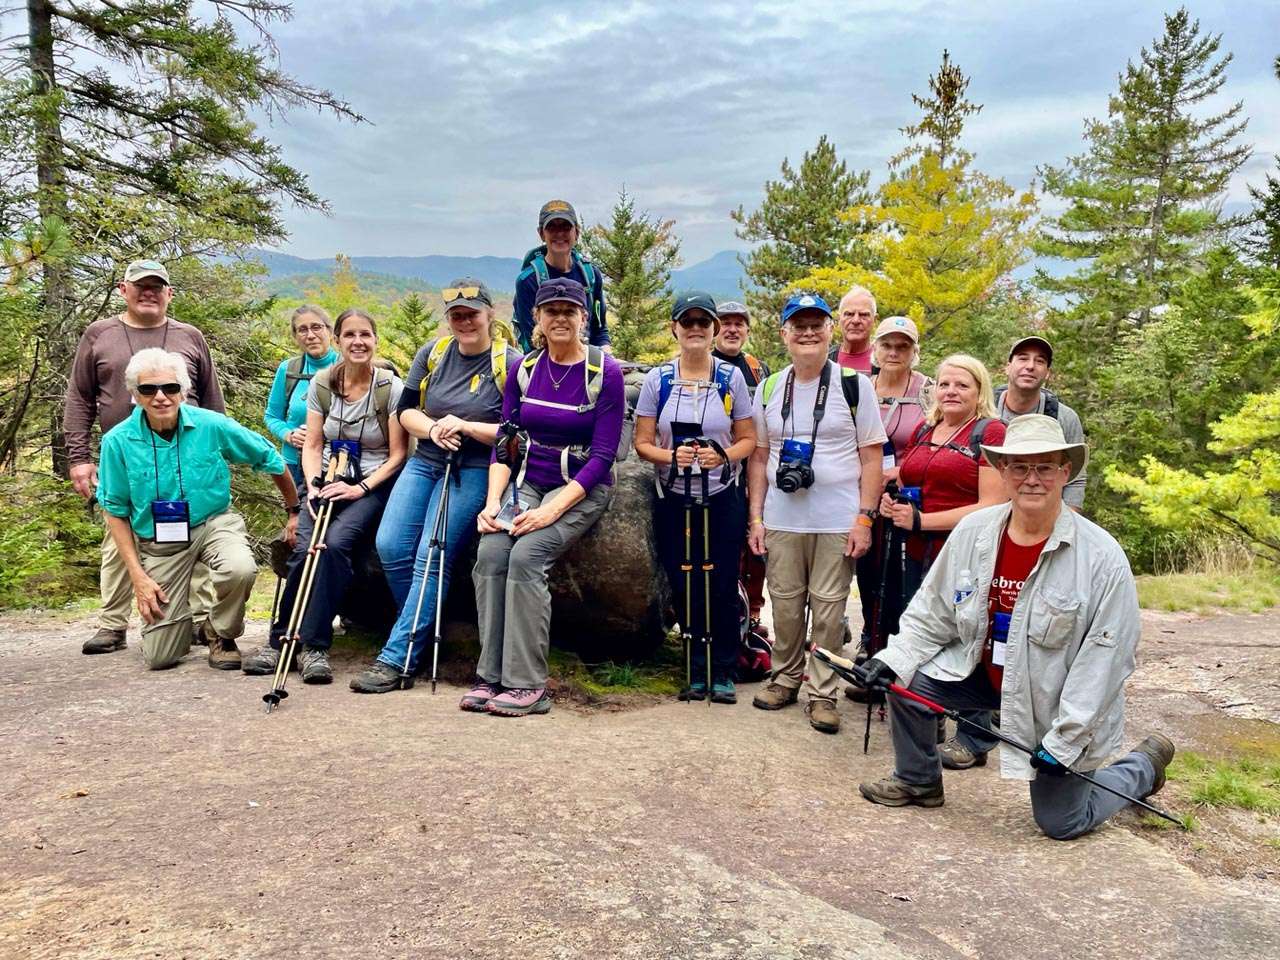 Hikers from the North Country Trail Association, which was meeting in the Adirondacks  for its annual celebration. Photo by Tim Rowland